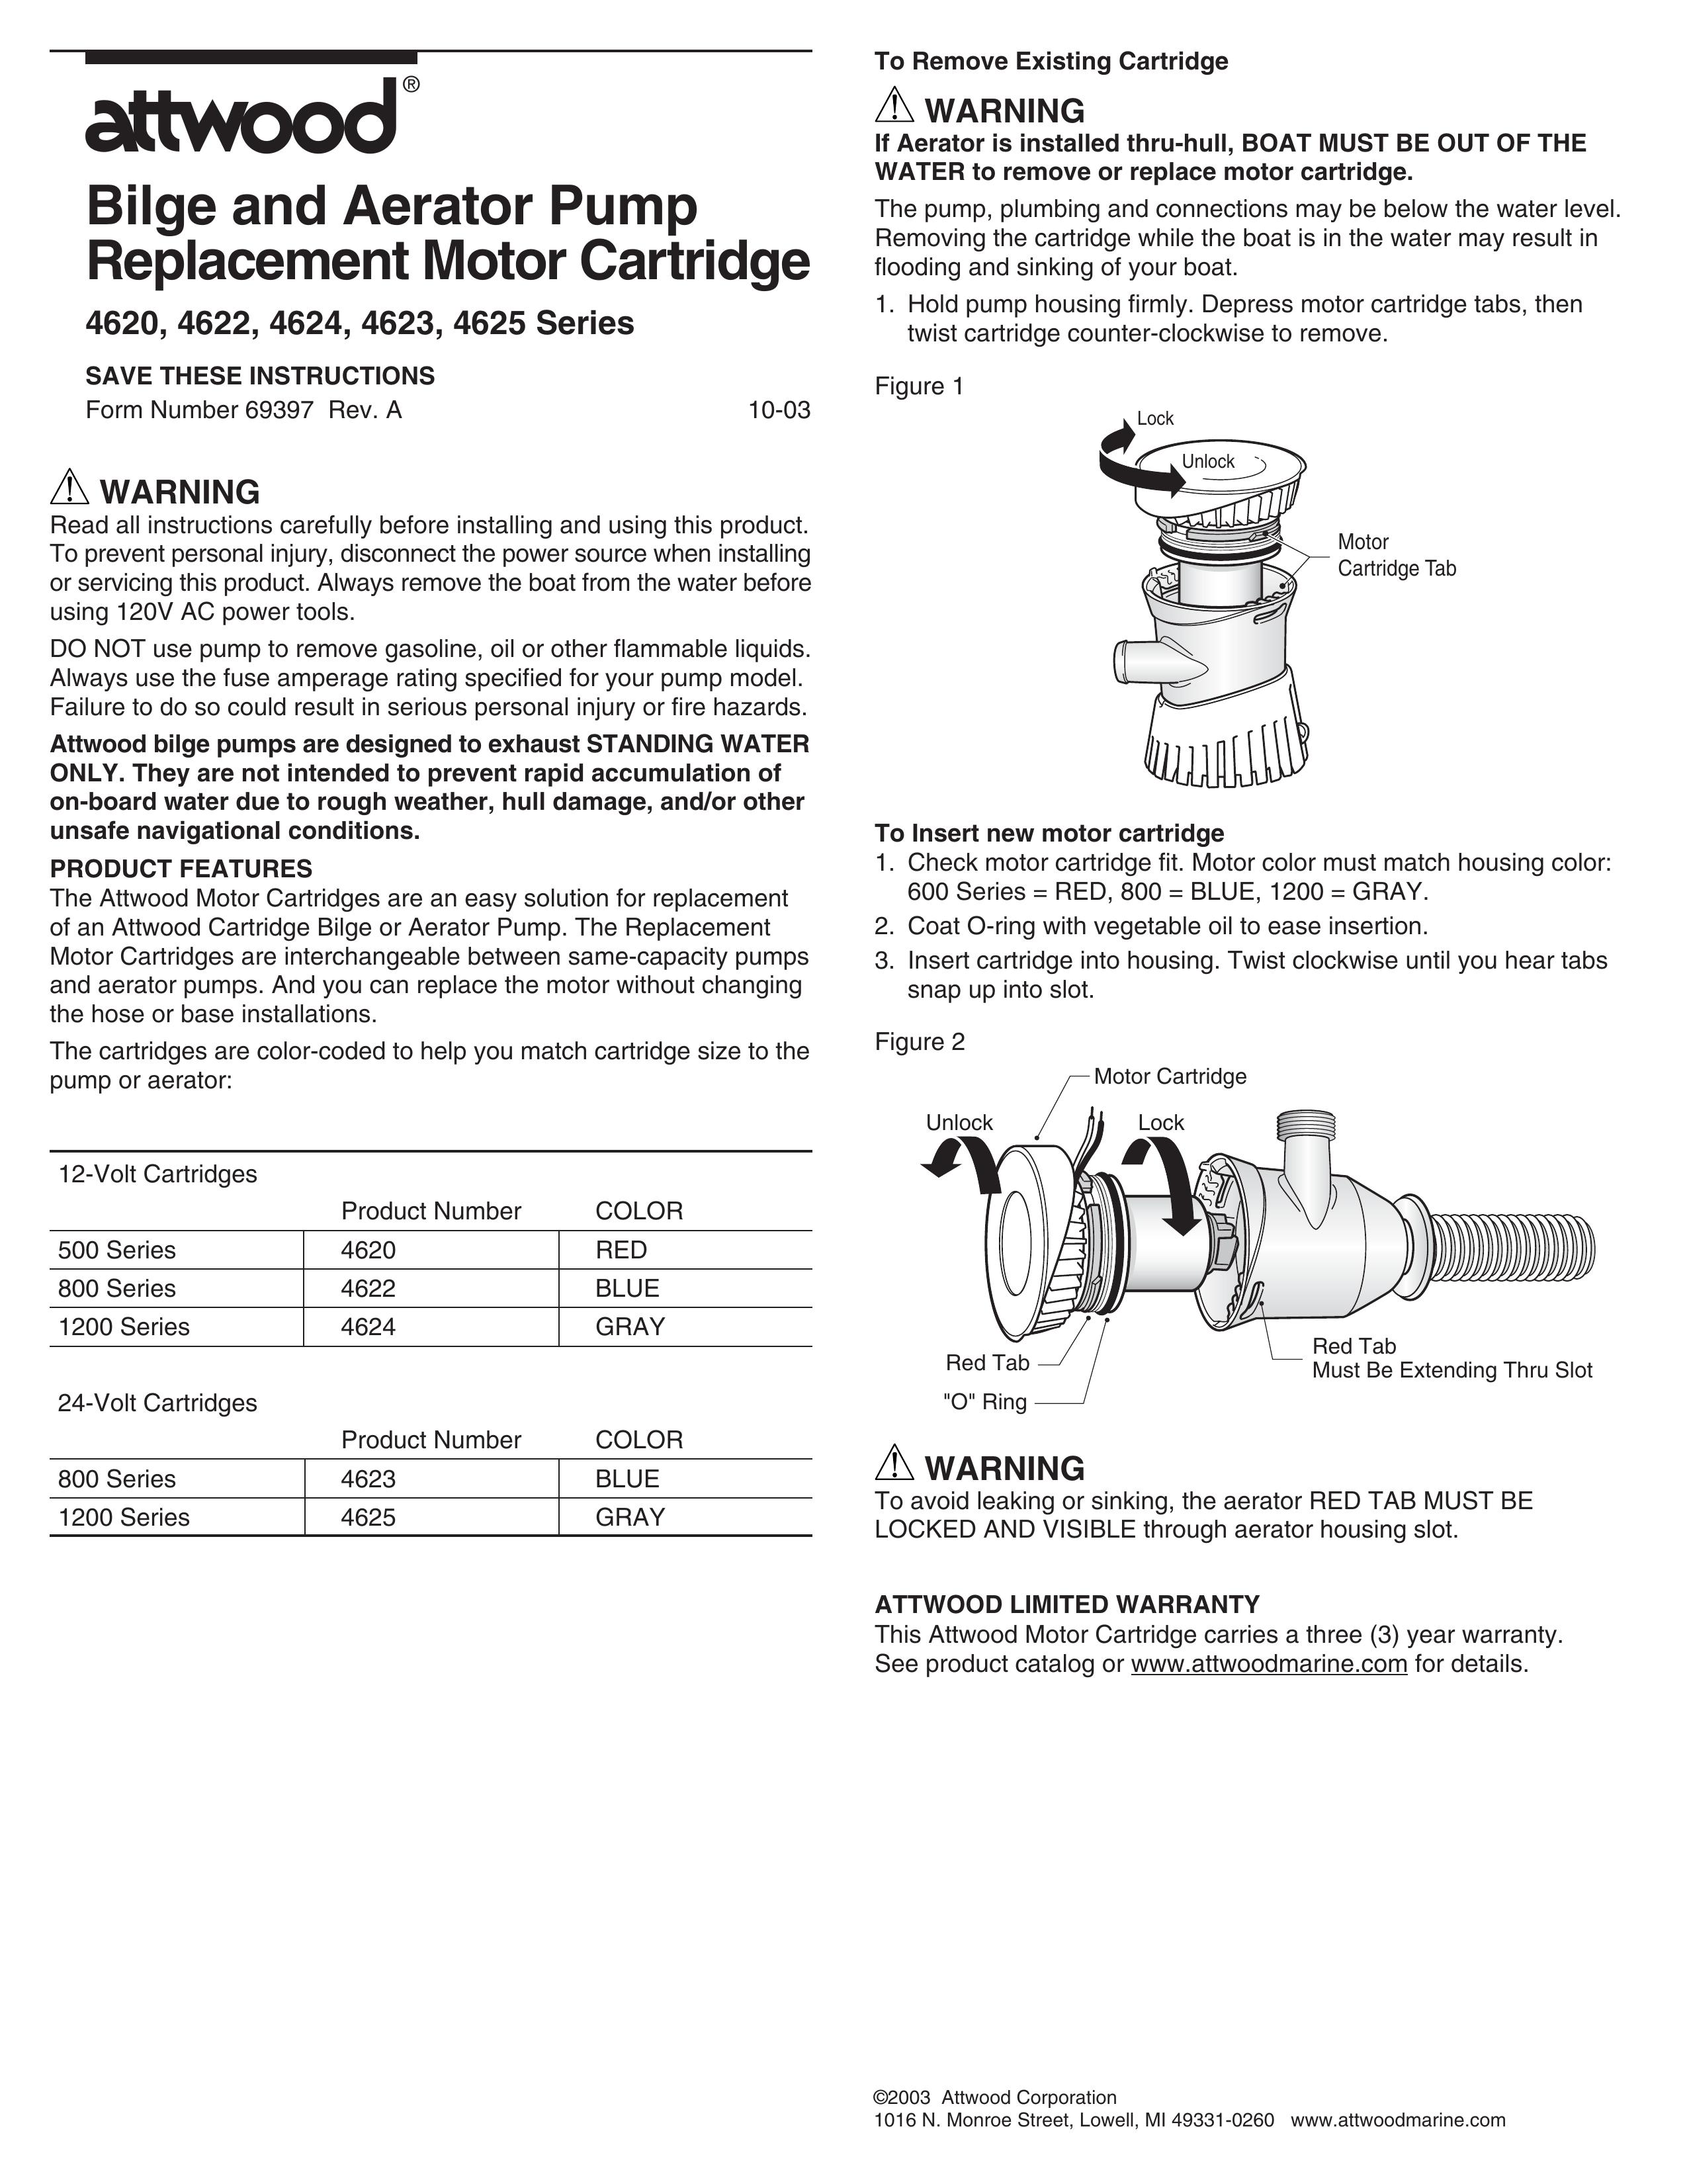 Attwood 4623 Boating Equipment User Manual (Page 1)